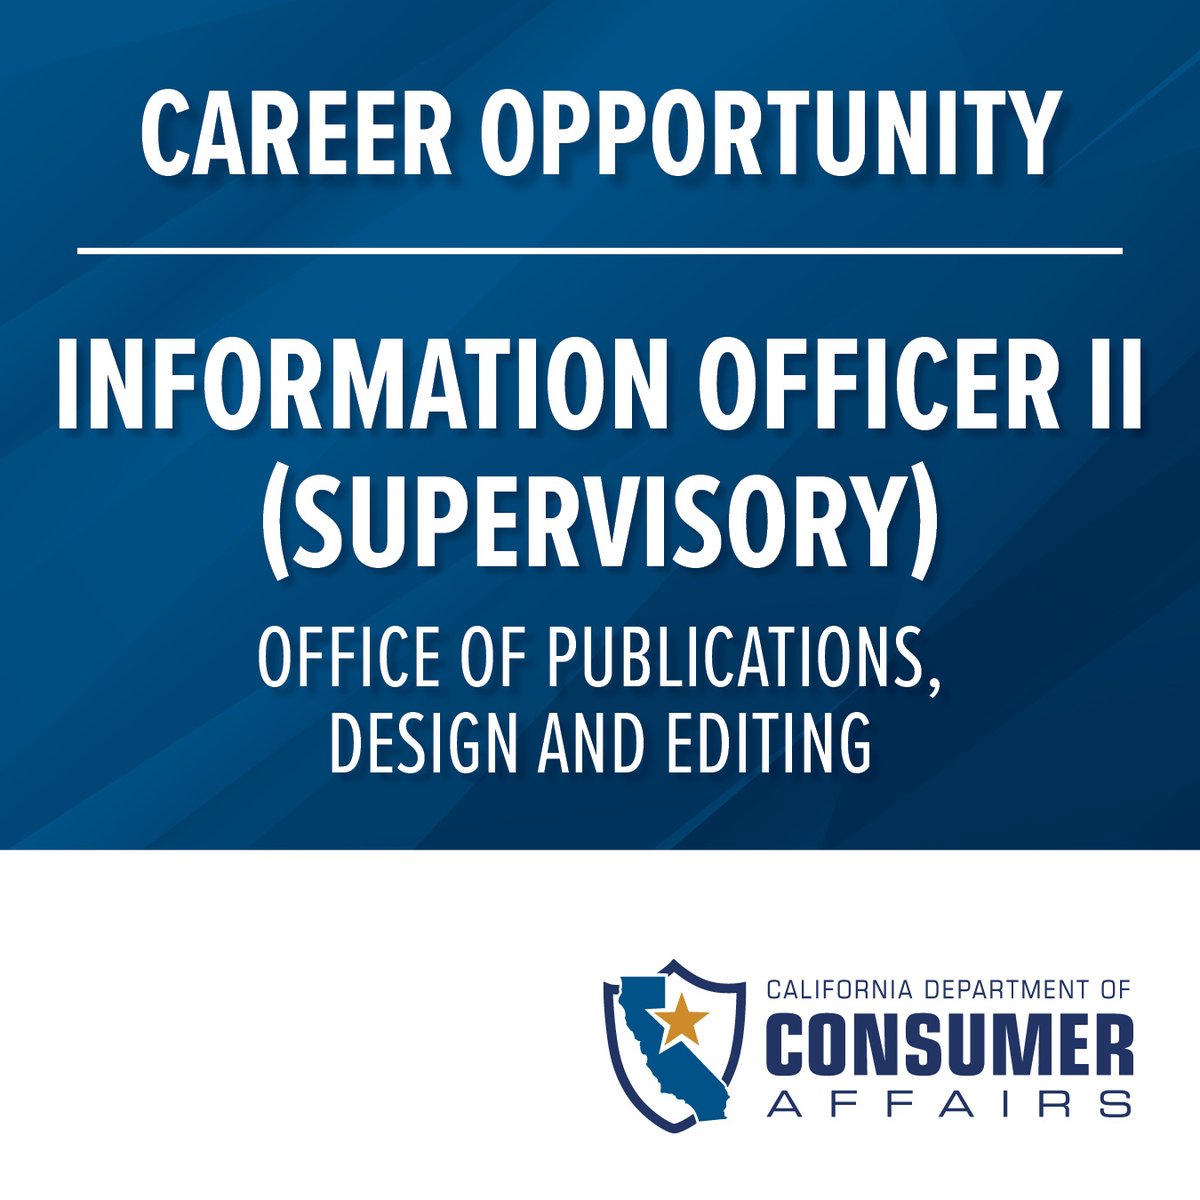 The California Department of Consumer Affairs’ Communications team is recruiting an Information Officer II to lead a team of skilled and creative staff in the Publications, Design and Editing (PDE) Office. For more information, visit: calcareers.ca.gov/CalHrPublic/Jo…